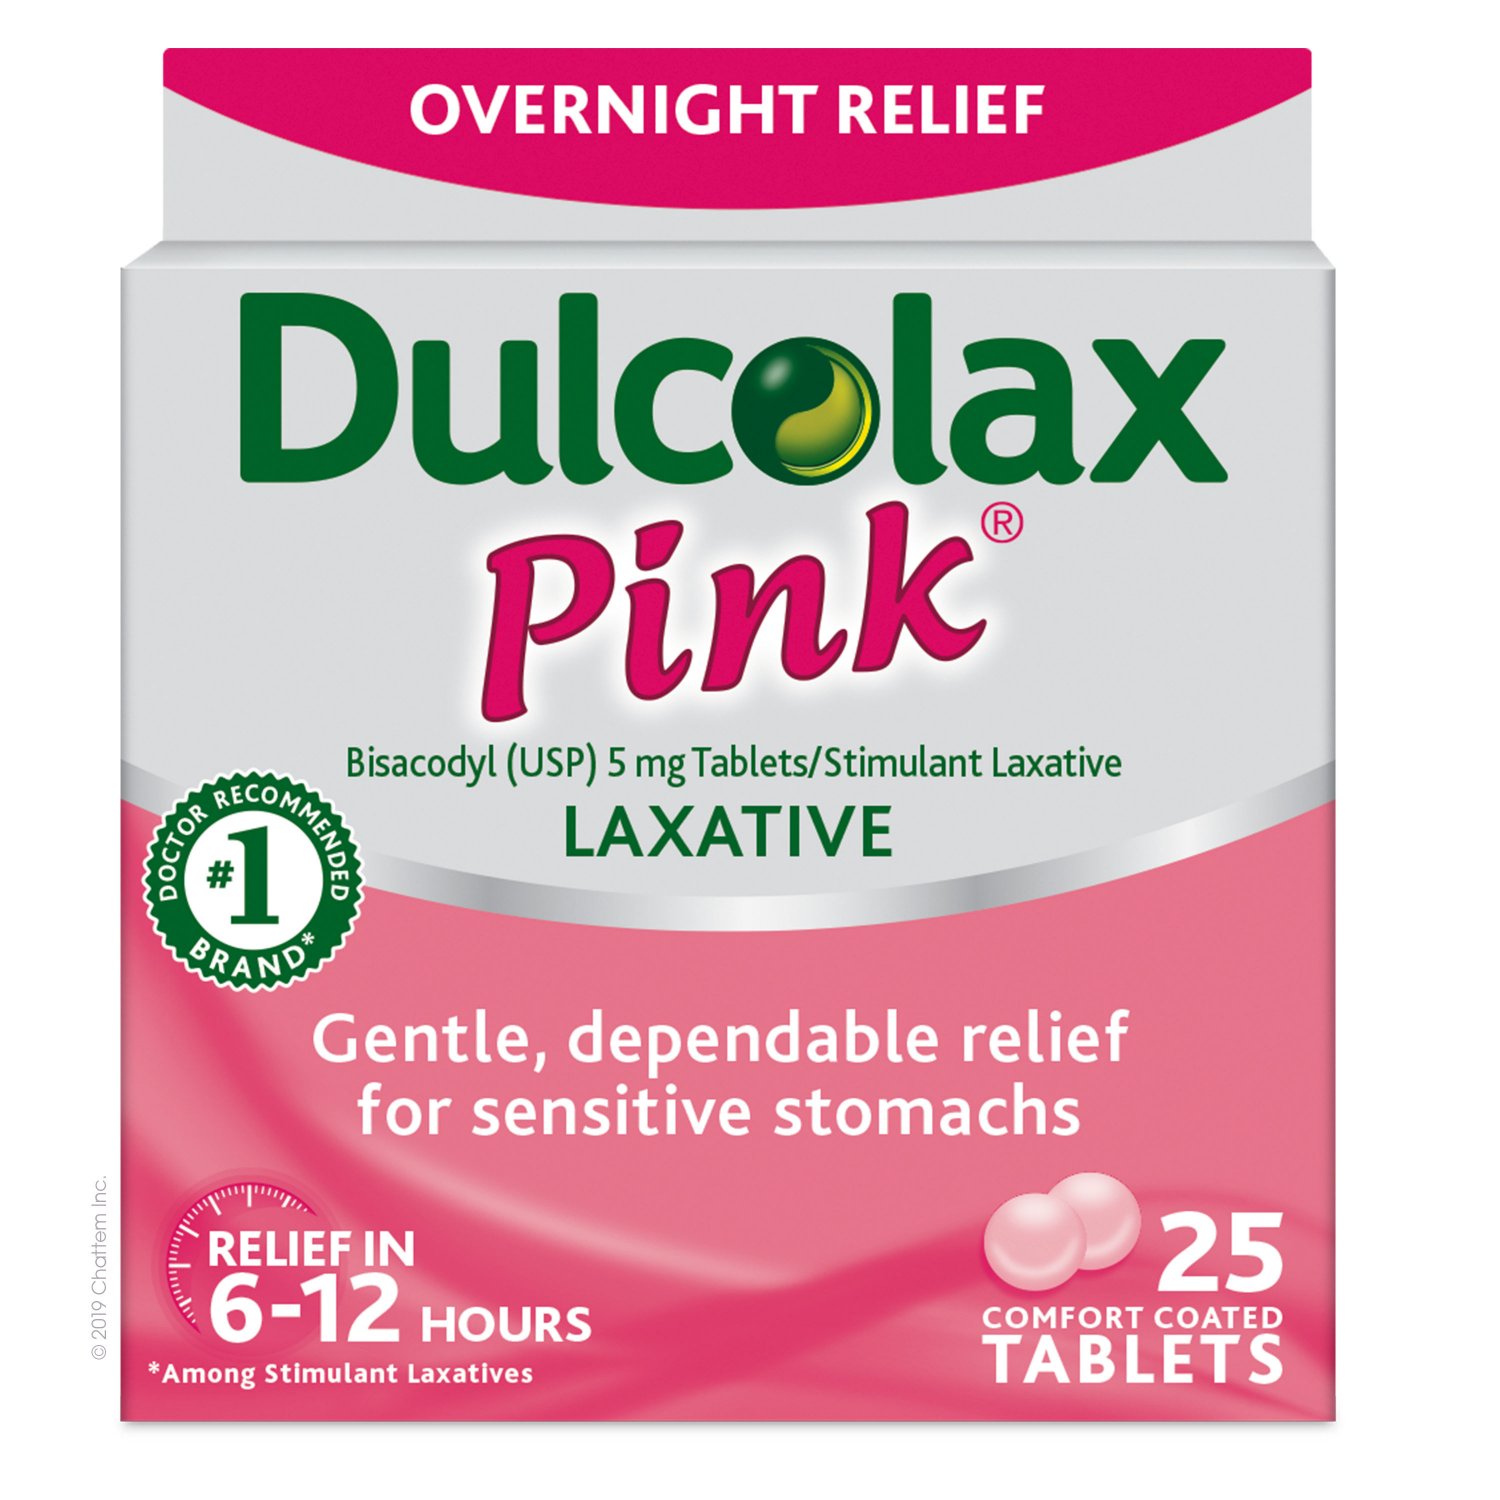 Dulcolax Pink Laxative Tablet Overnight Relief 25 Tablets